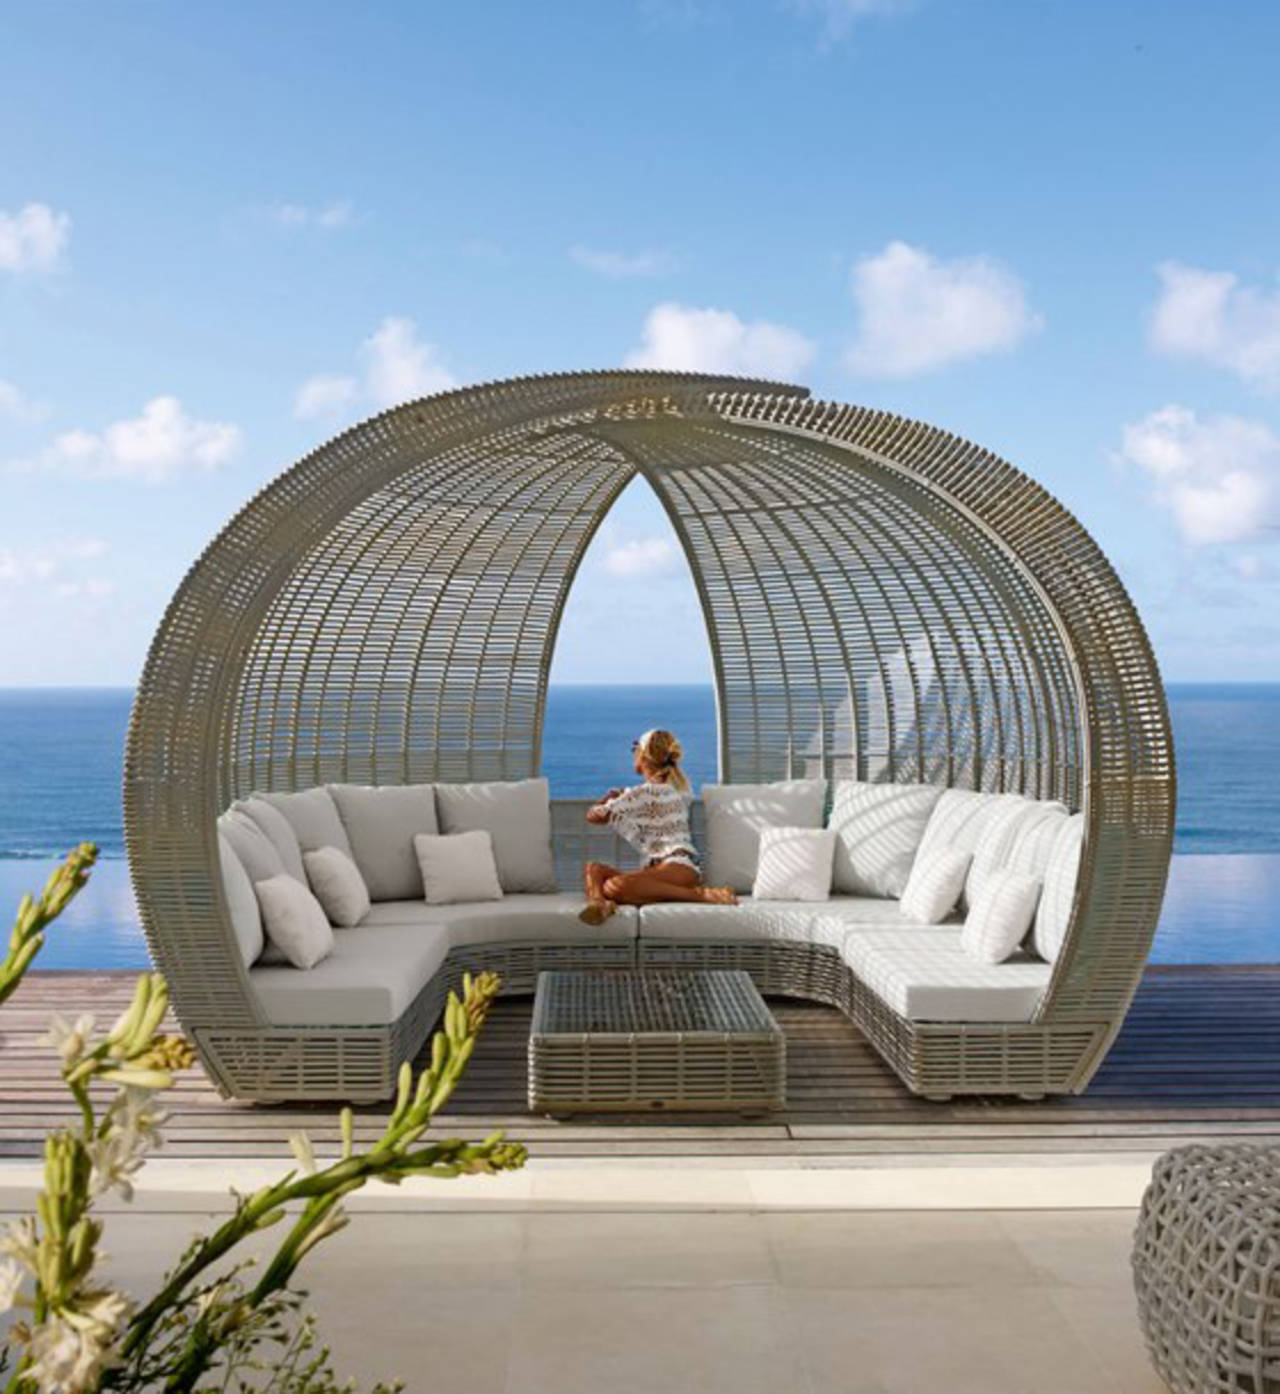 Series of Luxury Outdoor Furniture by Skyline Design - Home Reviews